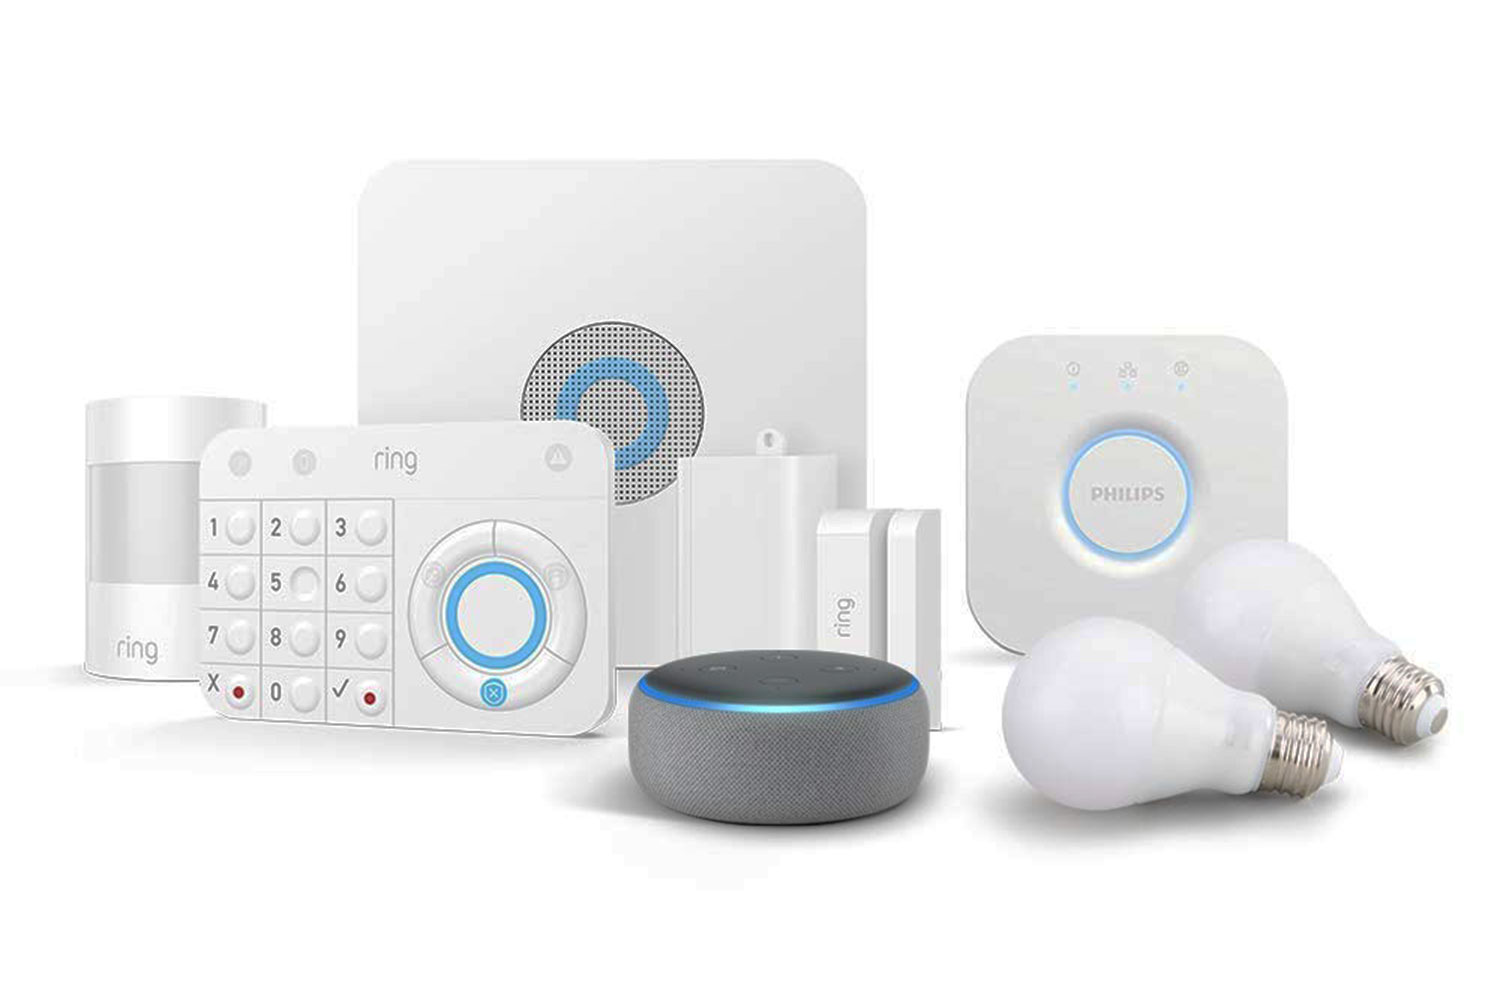 amazon discounts ring alarm system with echo dot and philips hue alexa guard kit 5 piece